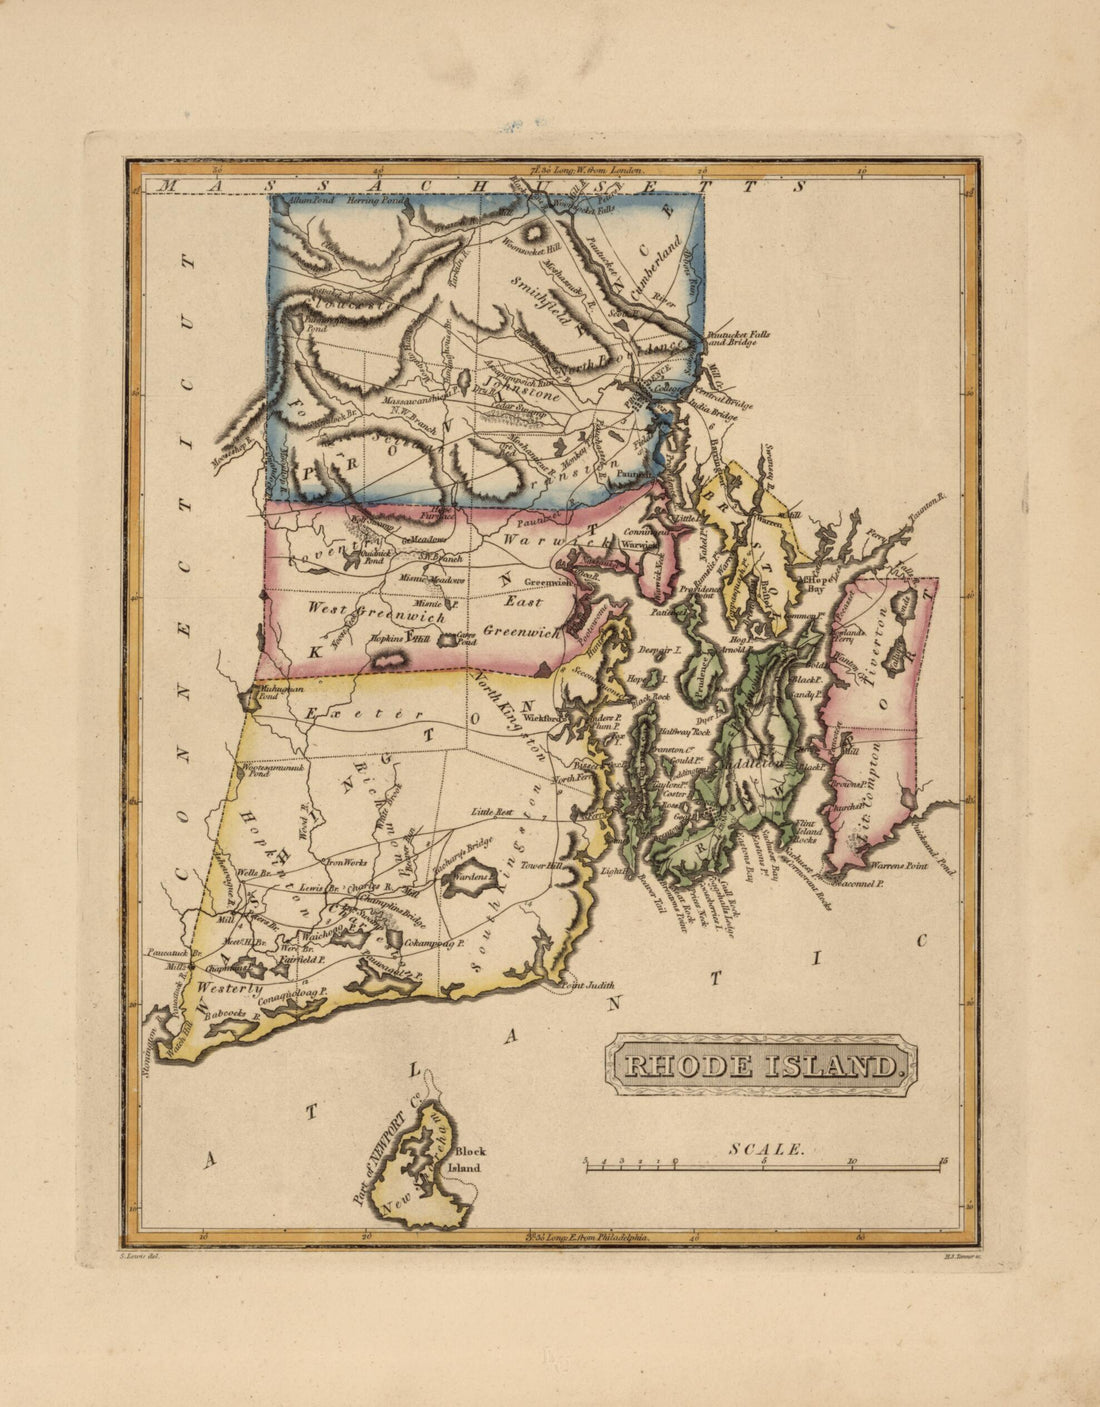 This old map of Rhode Island from a New and Elegant General Atlas, Containing Maps of Each of the United States  from 1817 was created by Henry Schenck Tanner in 1817